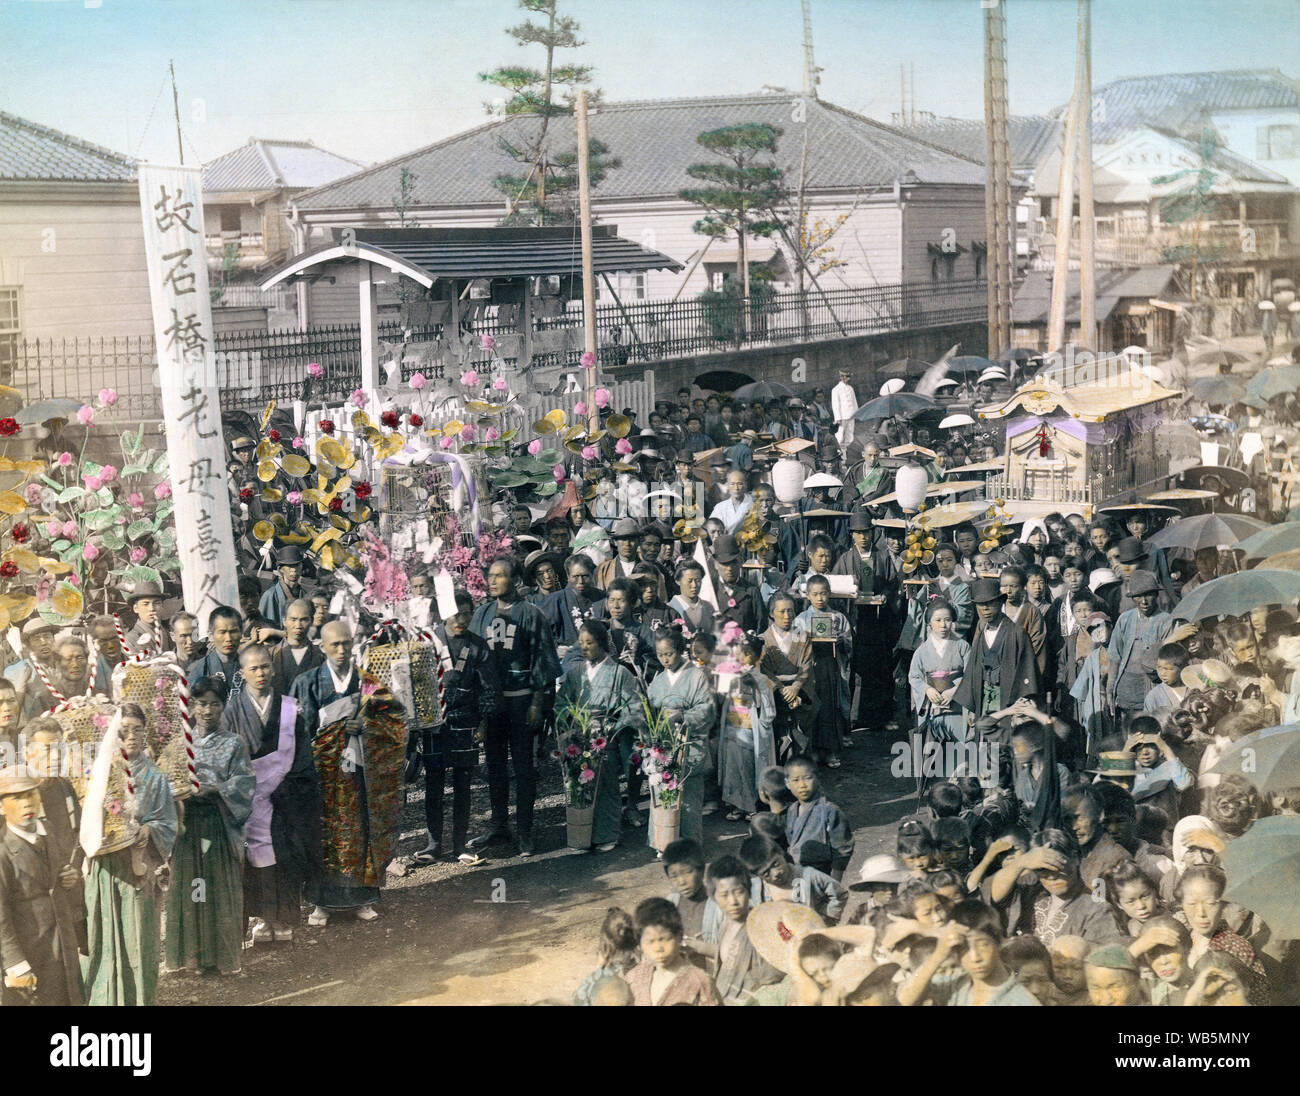 [ 1890s Japan - Japanese Funeral Procession ] —   A funeral procession. The mourners carry large clusters of artificial flowers.  19th century vintage albumen photograph. Stock Photo